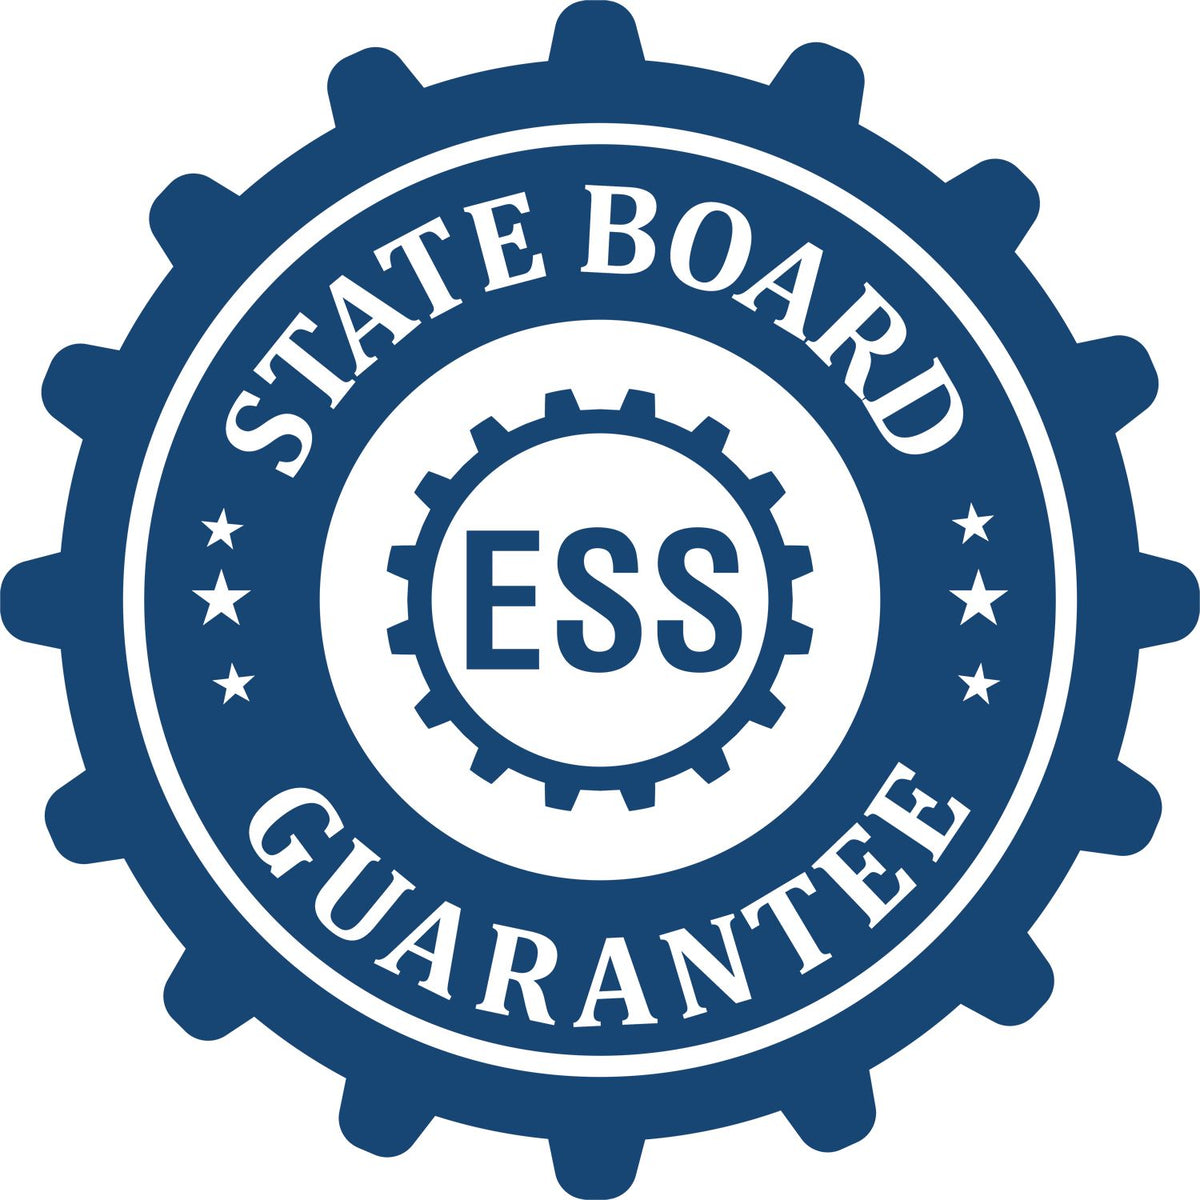 An emblem in a gear shape illustrating a state board guarantee for the Handheld Florida Land Surveyor Seal product.